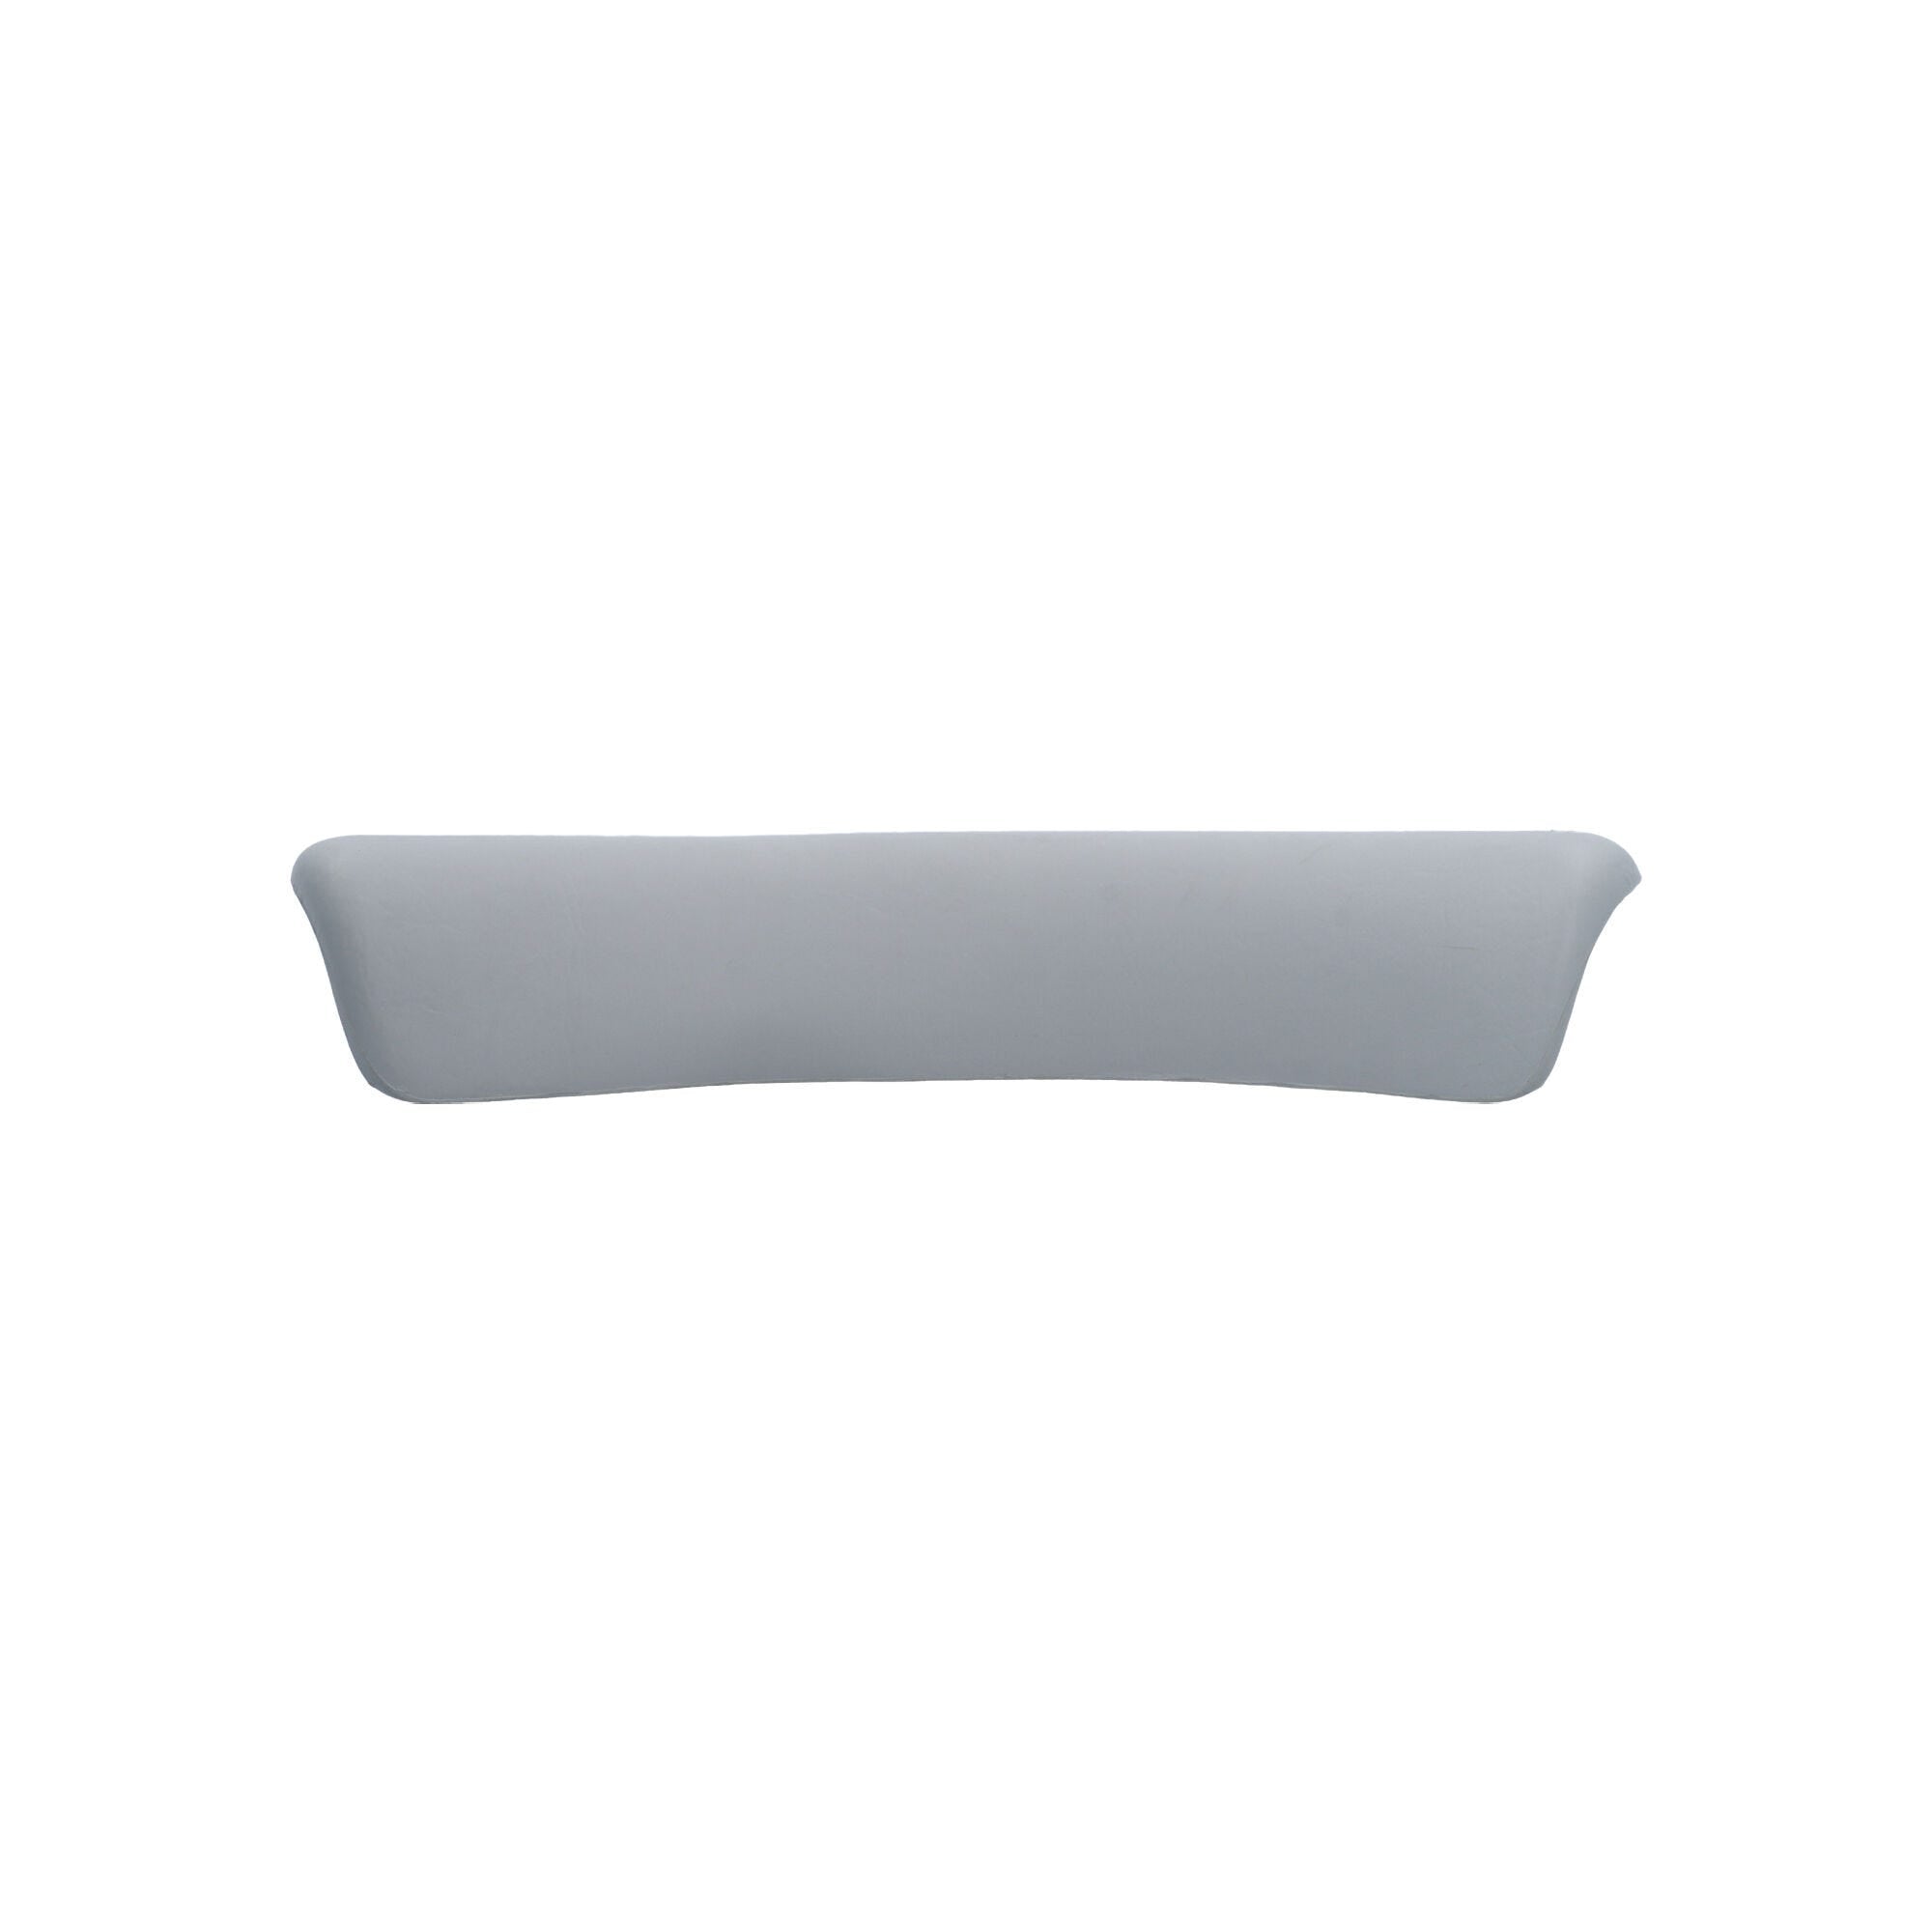 PILLOW: WRAP AROUND SUCTION CUP GREY